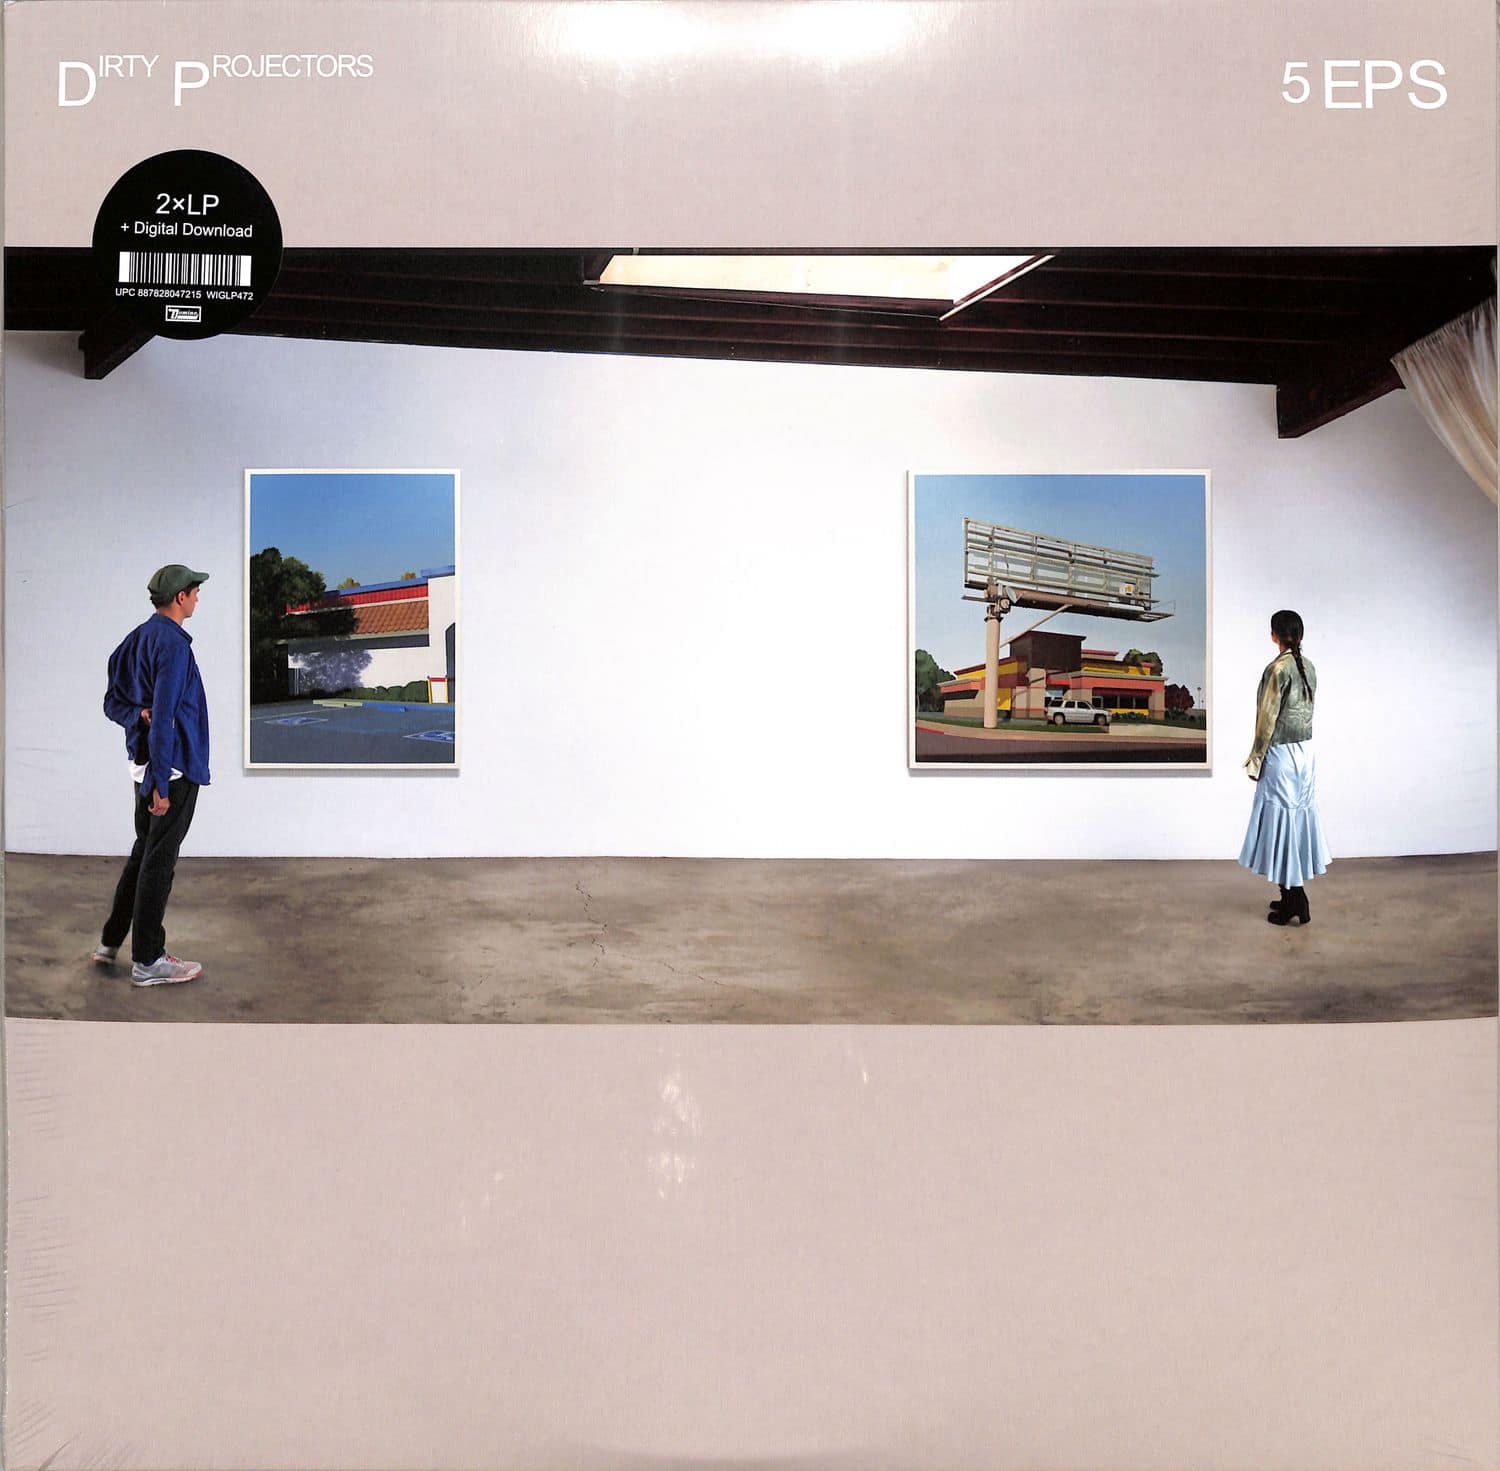 Dirty Projectors - 5 EPS 